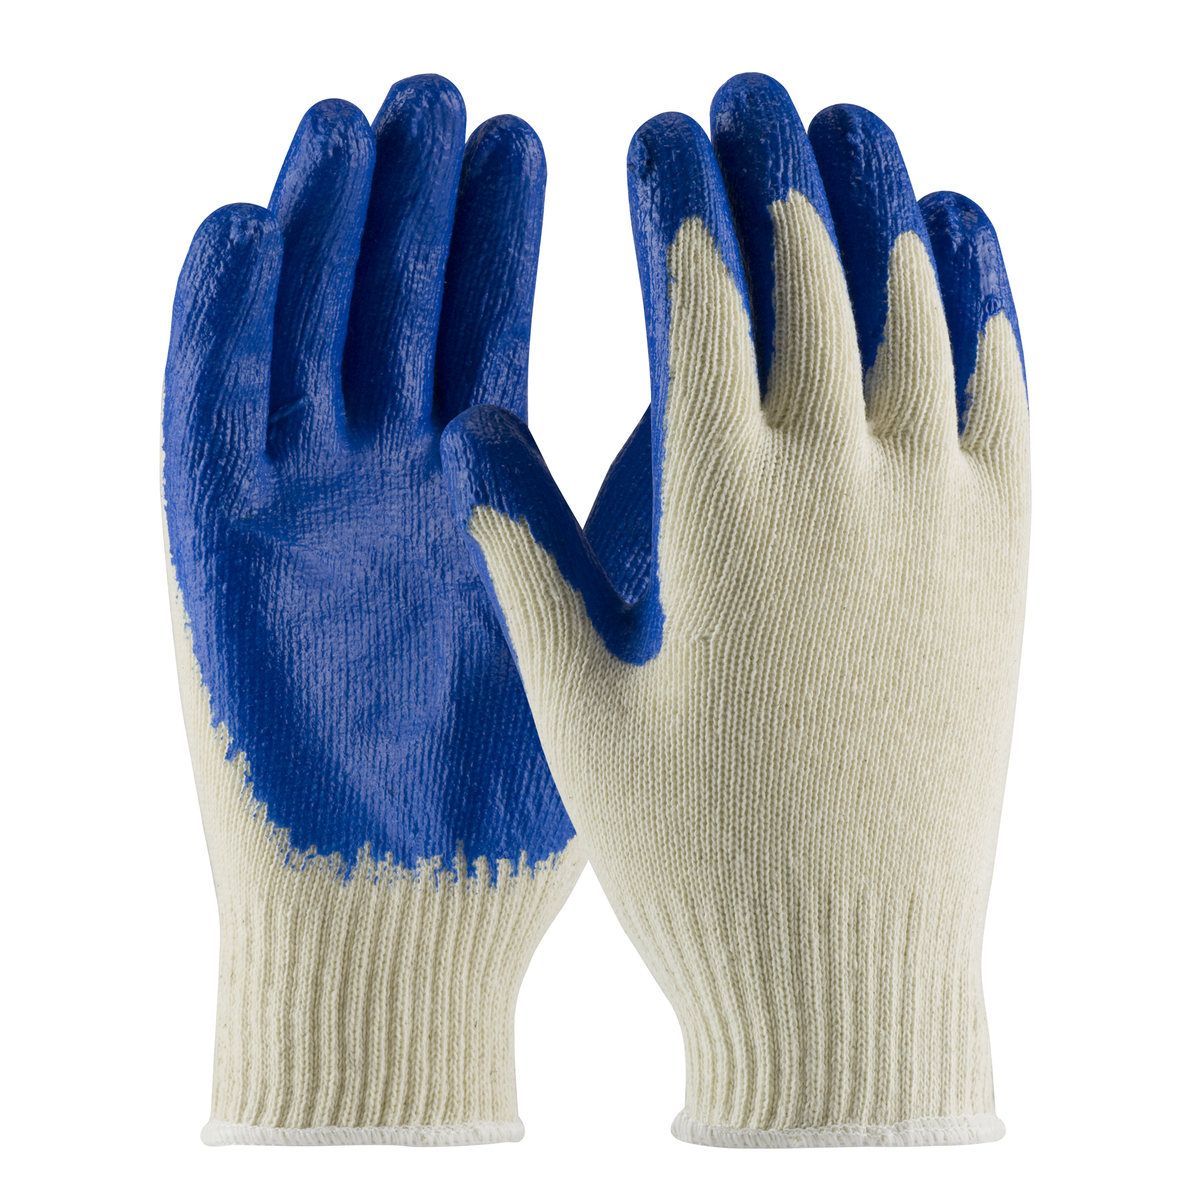 PIP® Large  7 Gauge Blue Nitrile Palm And Finger Coated Work Gloves With Cotton And Polyester Liner And Continuous Knit Wrist